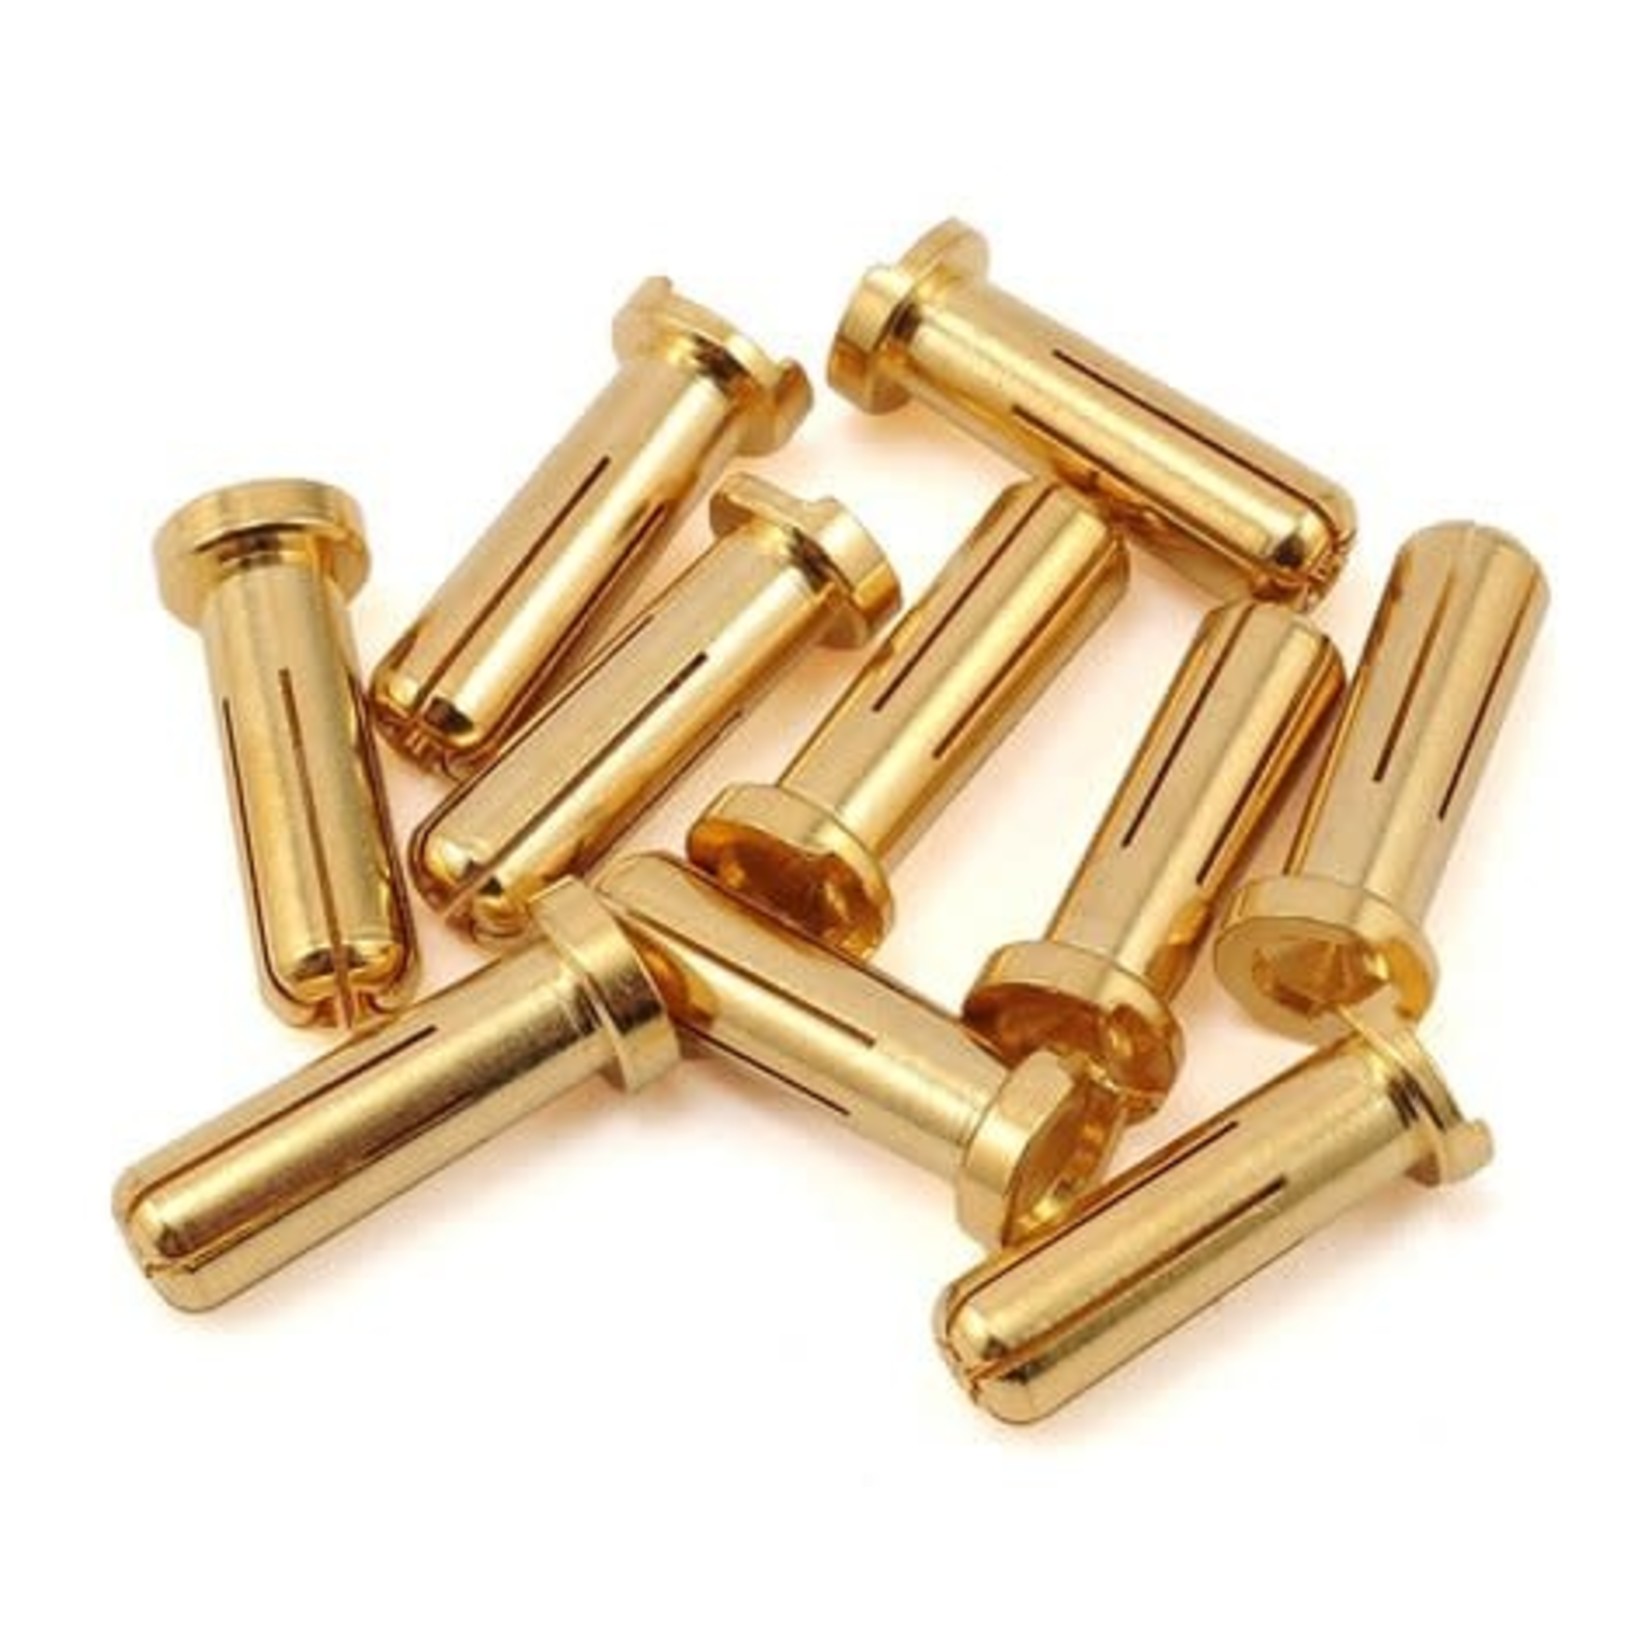 Maclan Maclan Max Current 5mm Gold Bullet Connectors (10) #MCL4042